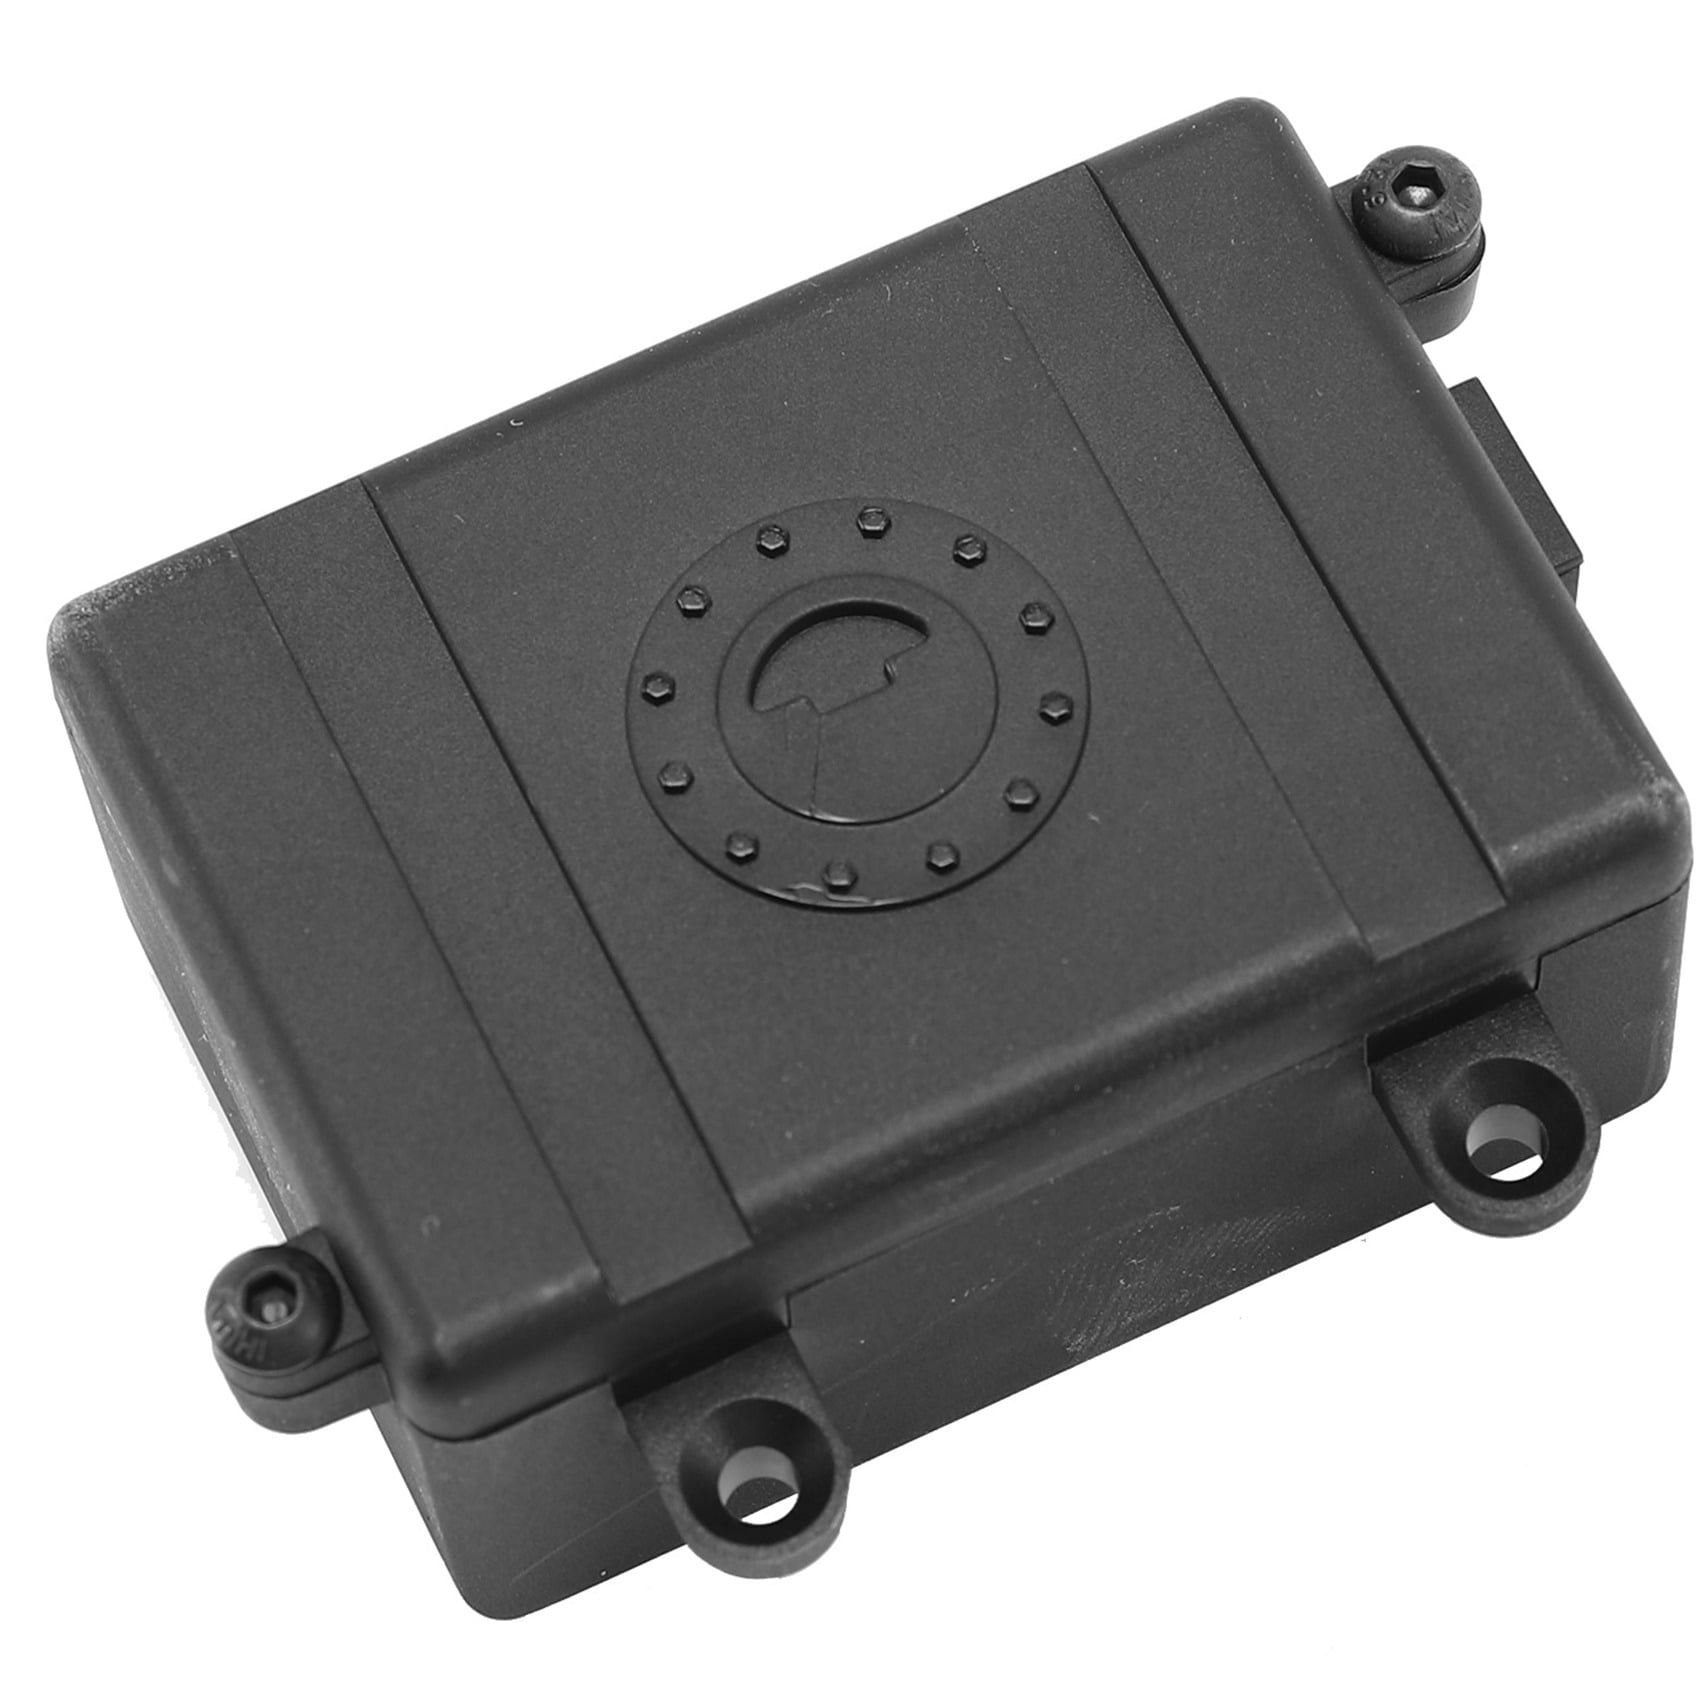 Receiver Box for 1/10 scale Axial Rock Crawler RC4WD D90 D110 D130  ll